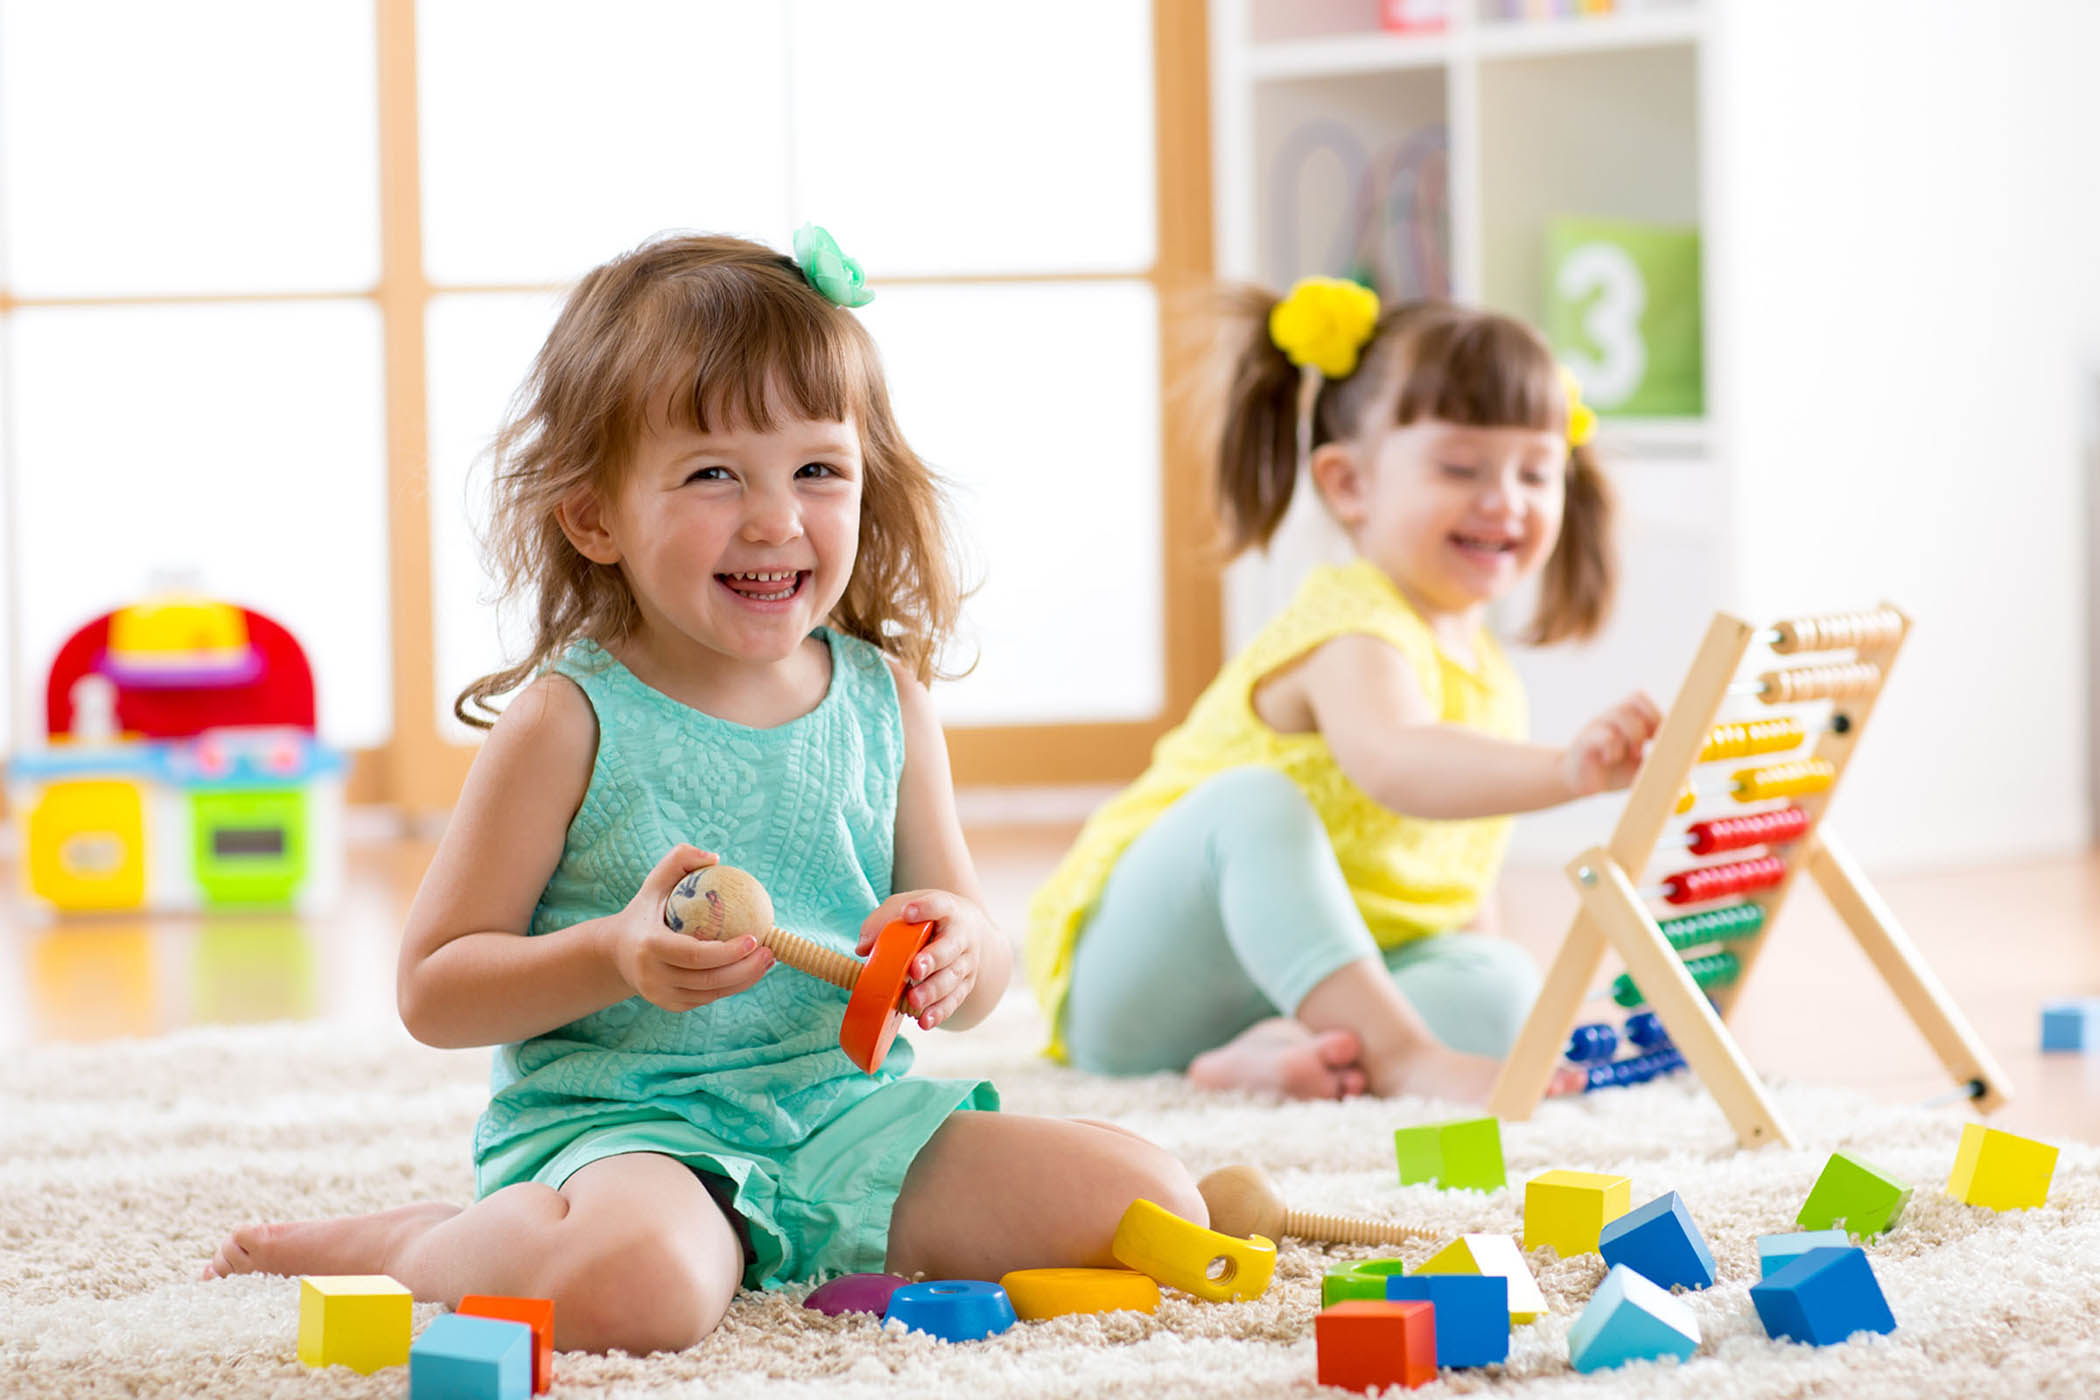 Toddler girls playing with colorful montessori educational toys